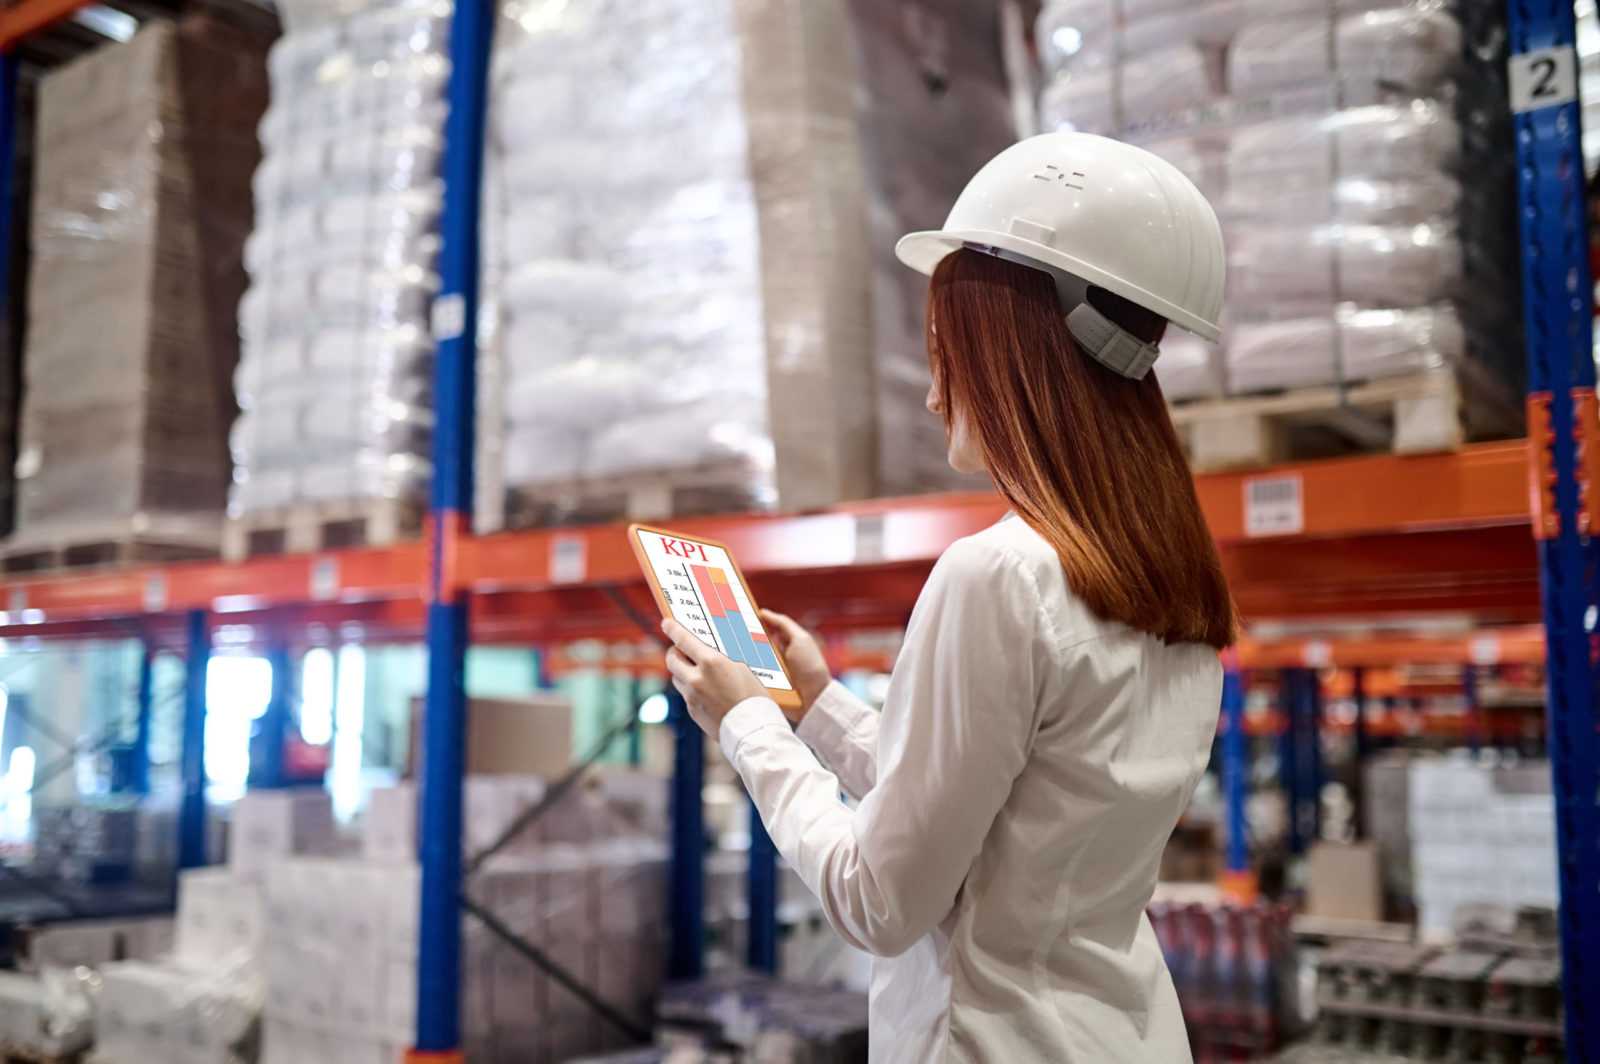 Measure KPI in your warehouse or distribution center